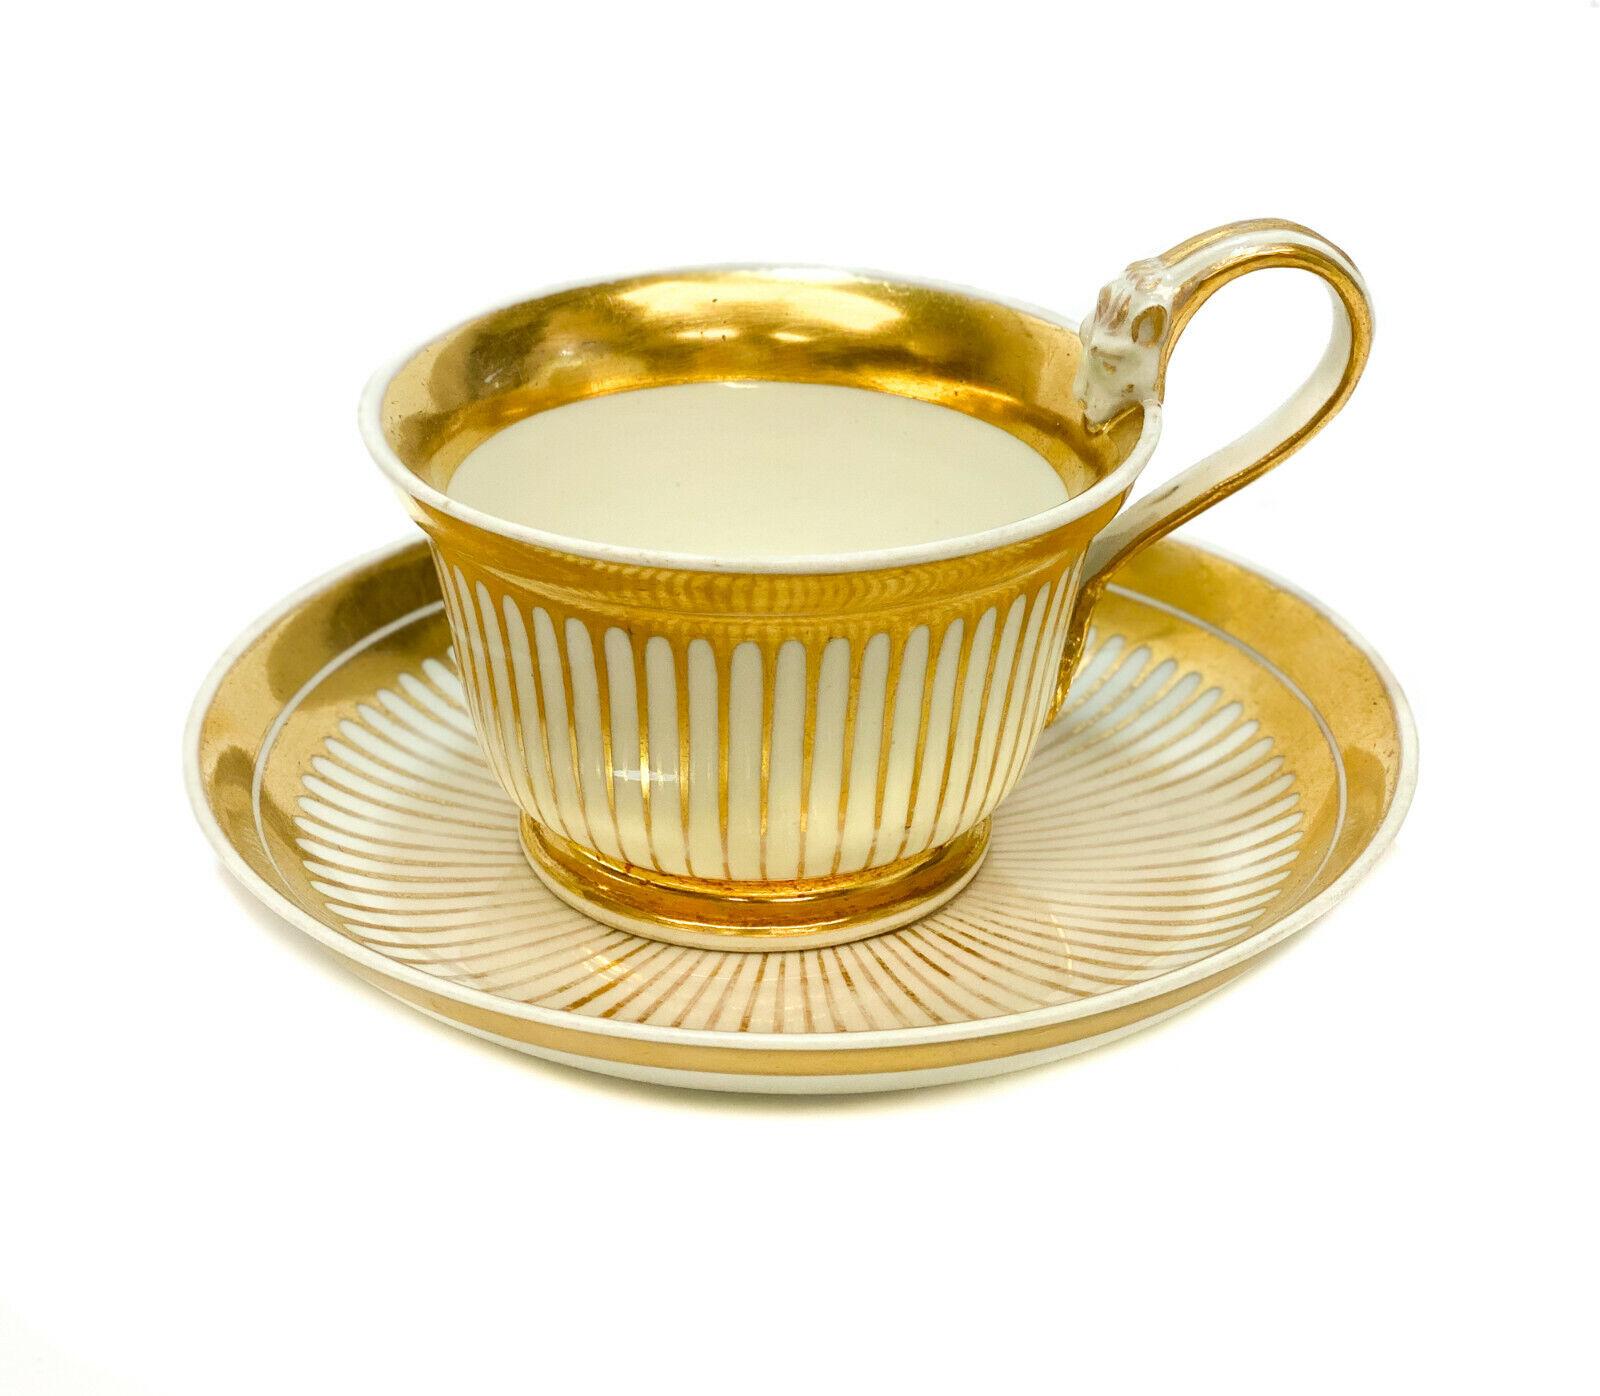 Imperial Royal Vienna Porcelain and Gilt Striped Cup & Saucer, 1821 In Good Condition For Sale In Gardena, CA